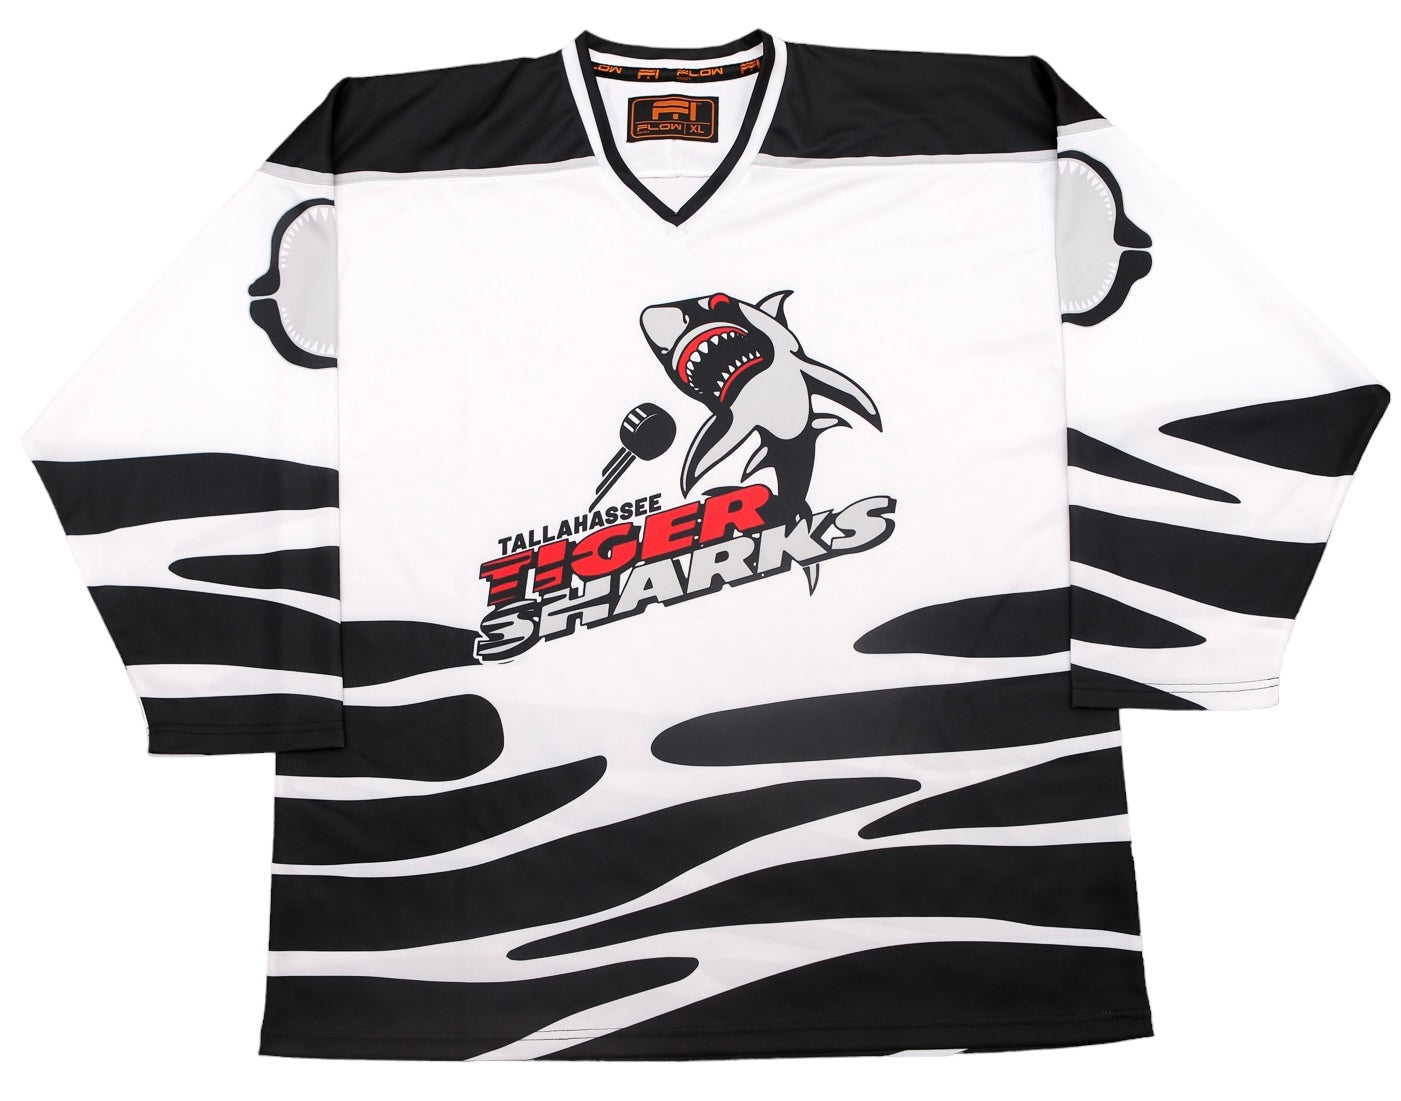 Uniforms Express Vegas Knight Hawks Authentic Red Jersey MD